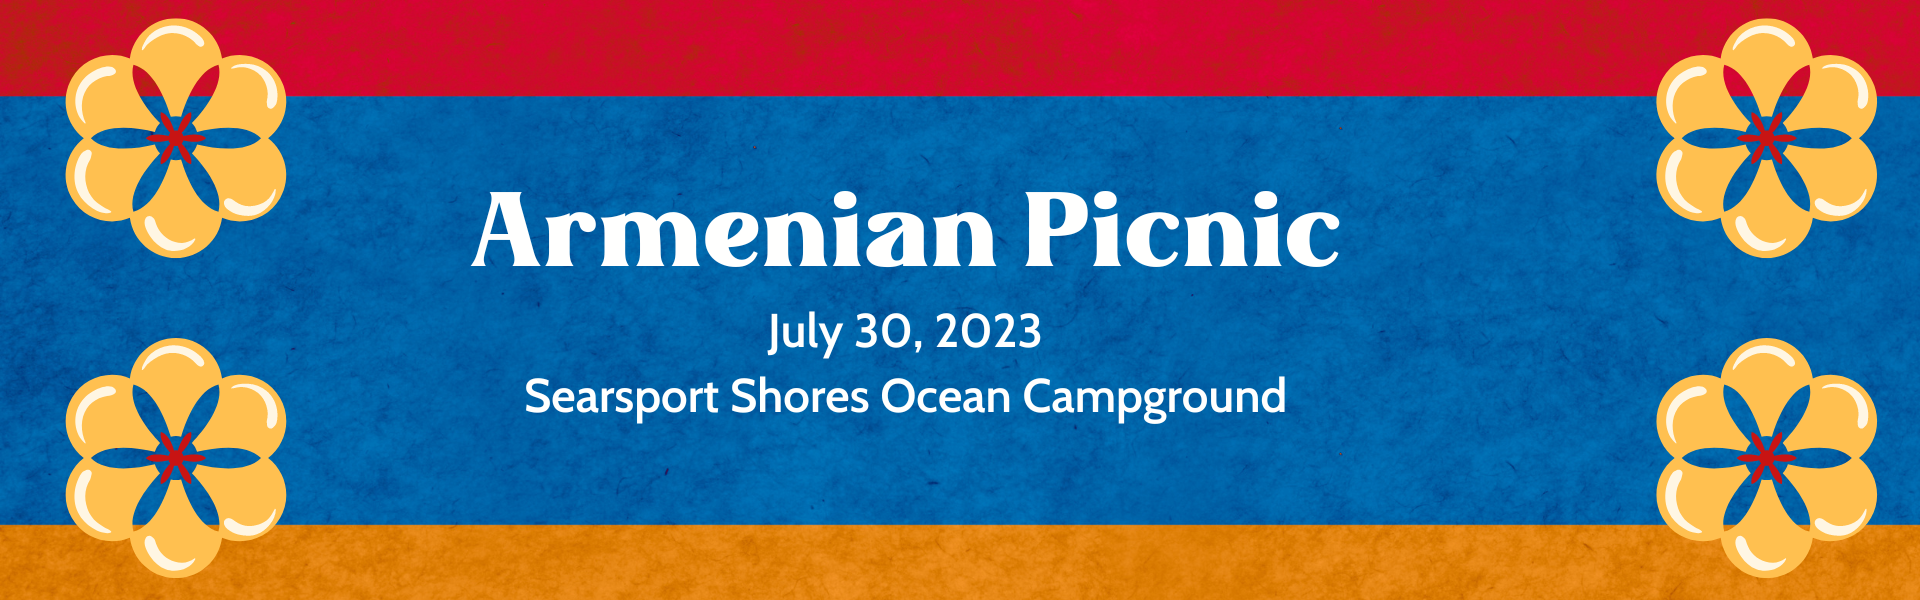 Armenian Picnic Banner July 30 2023 Searsport Shores Ocean Campground